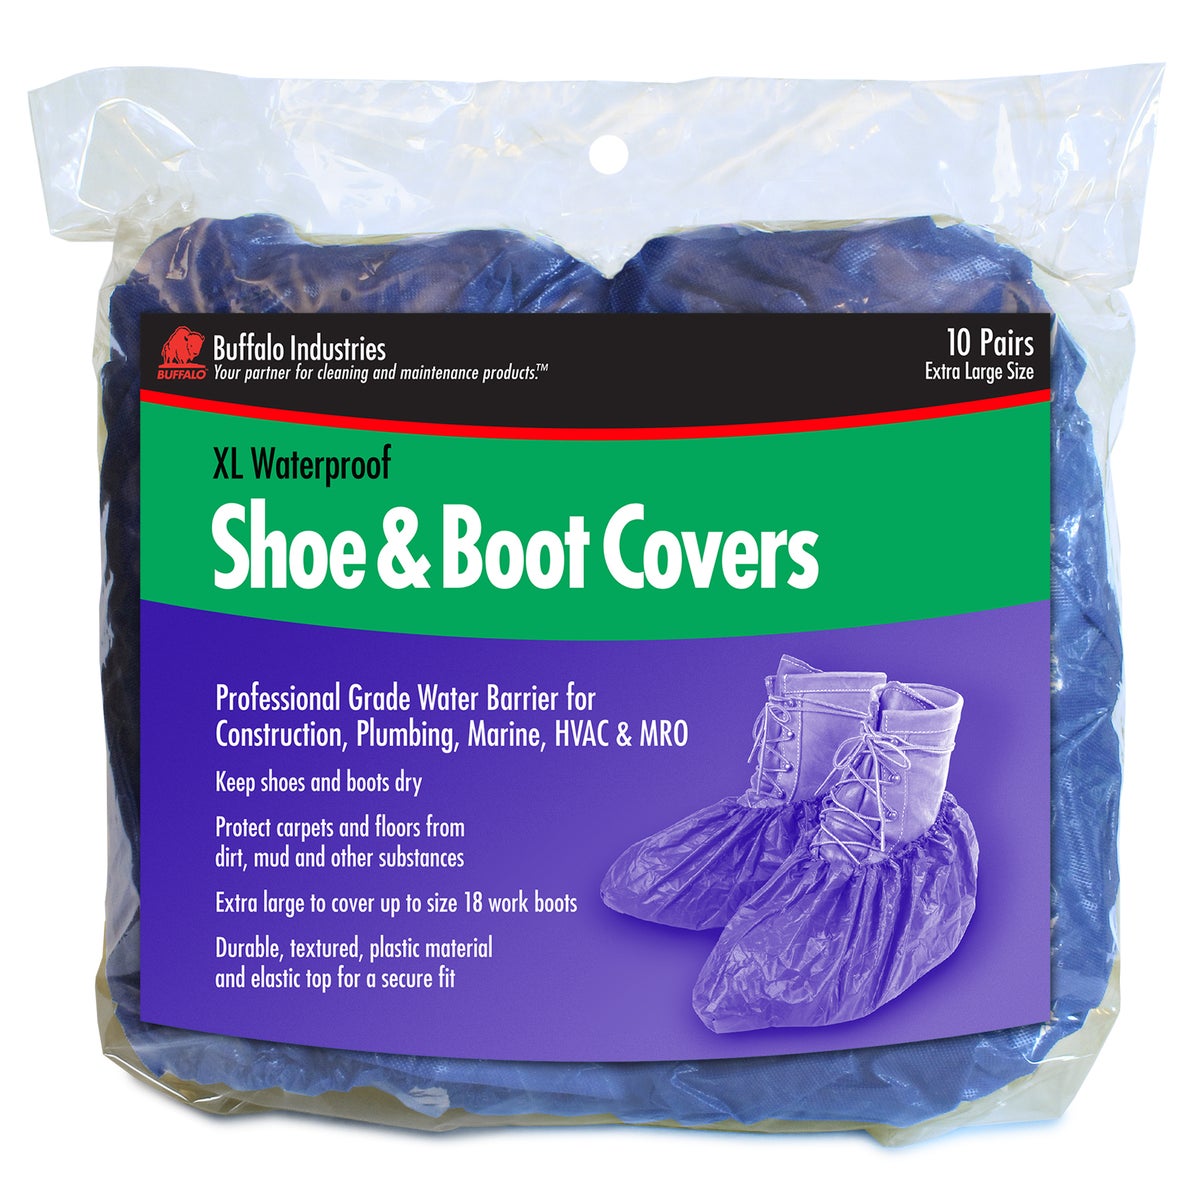 SHOE/BOOT COVERS N (BAG OF 10 )